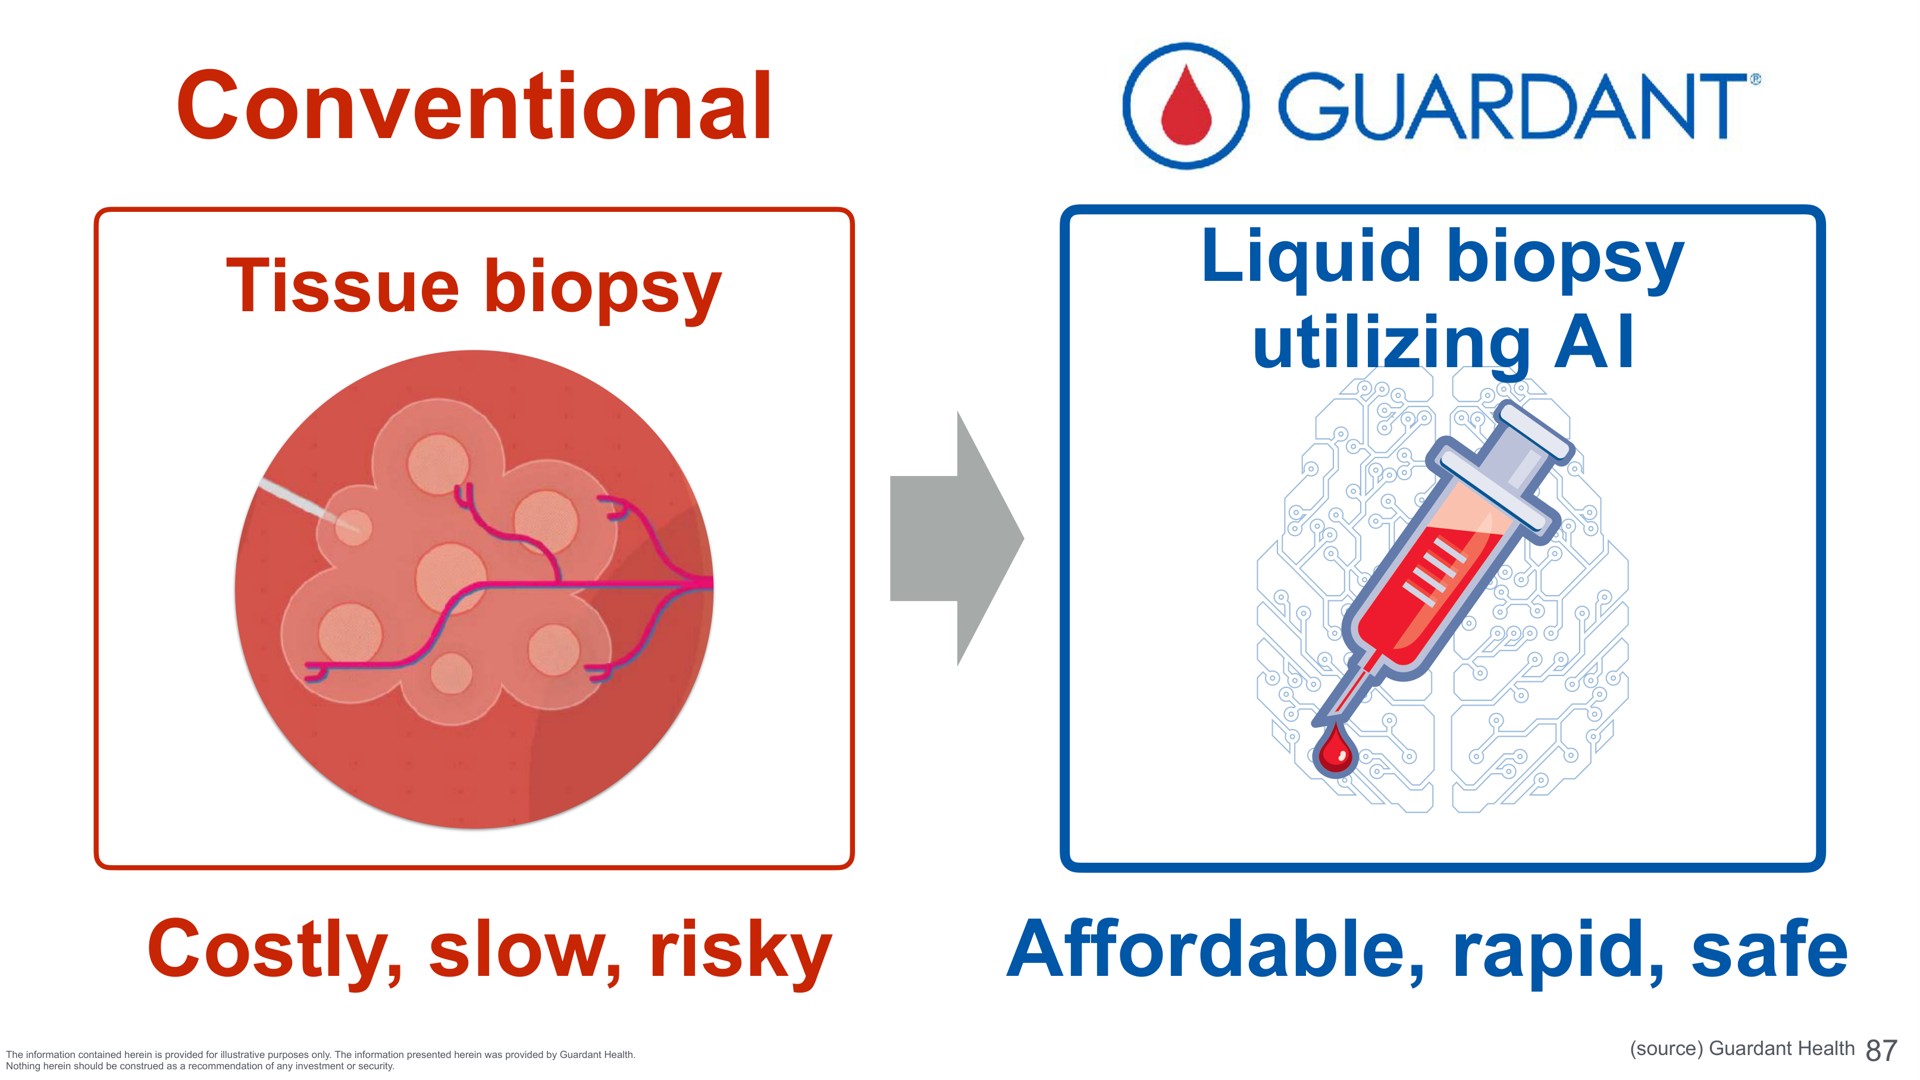 conventional guardant tissue biopsy liquid biopsy utilizing costly slow risky affordable rapid safe | SoftBank